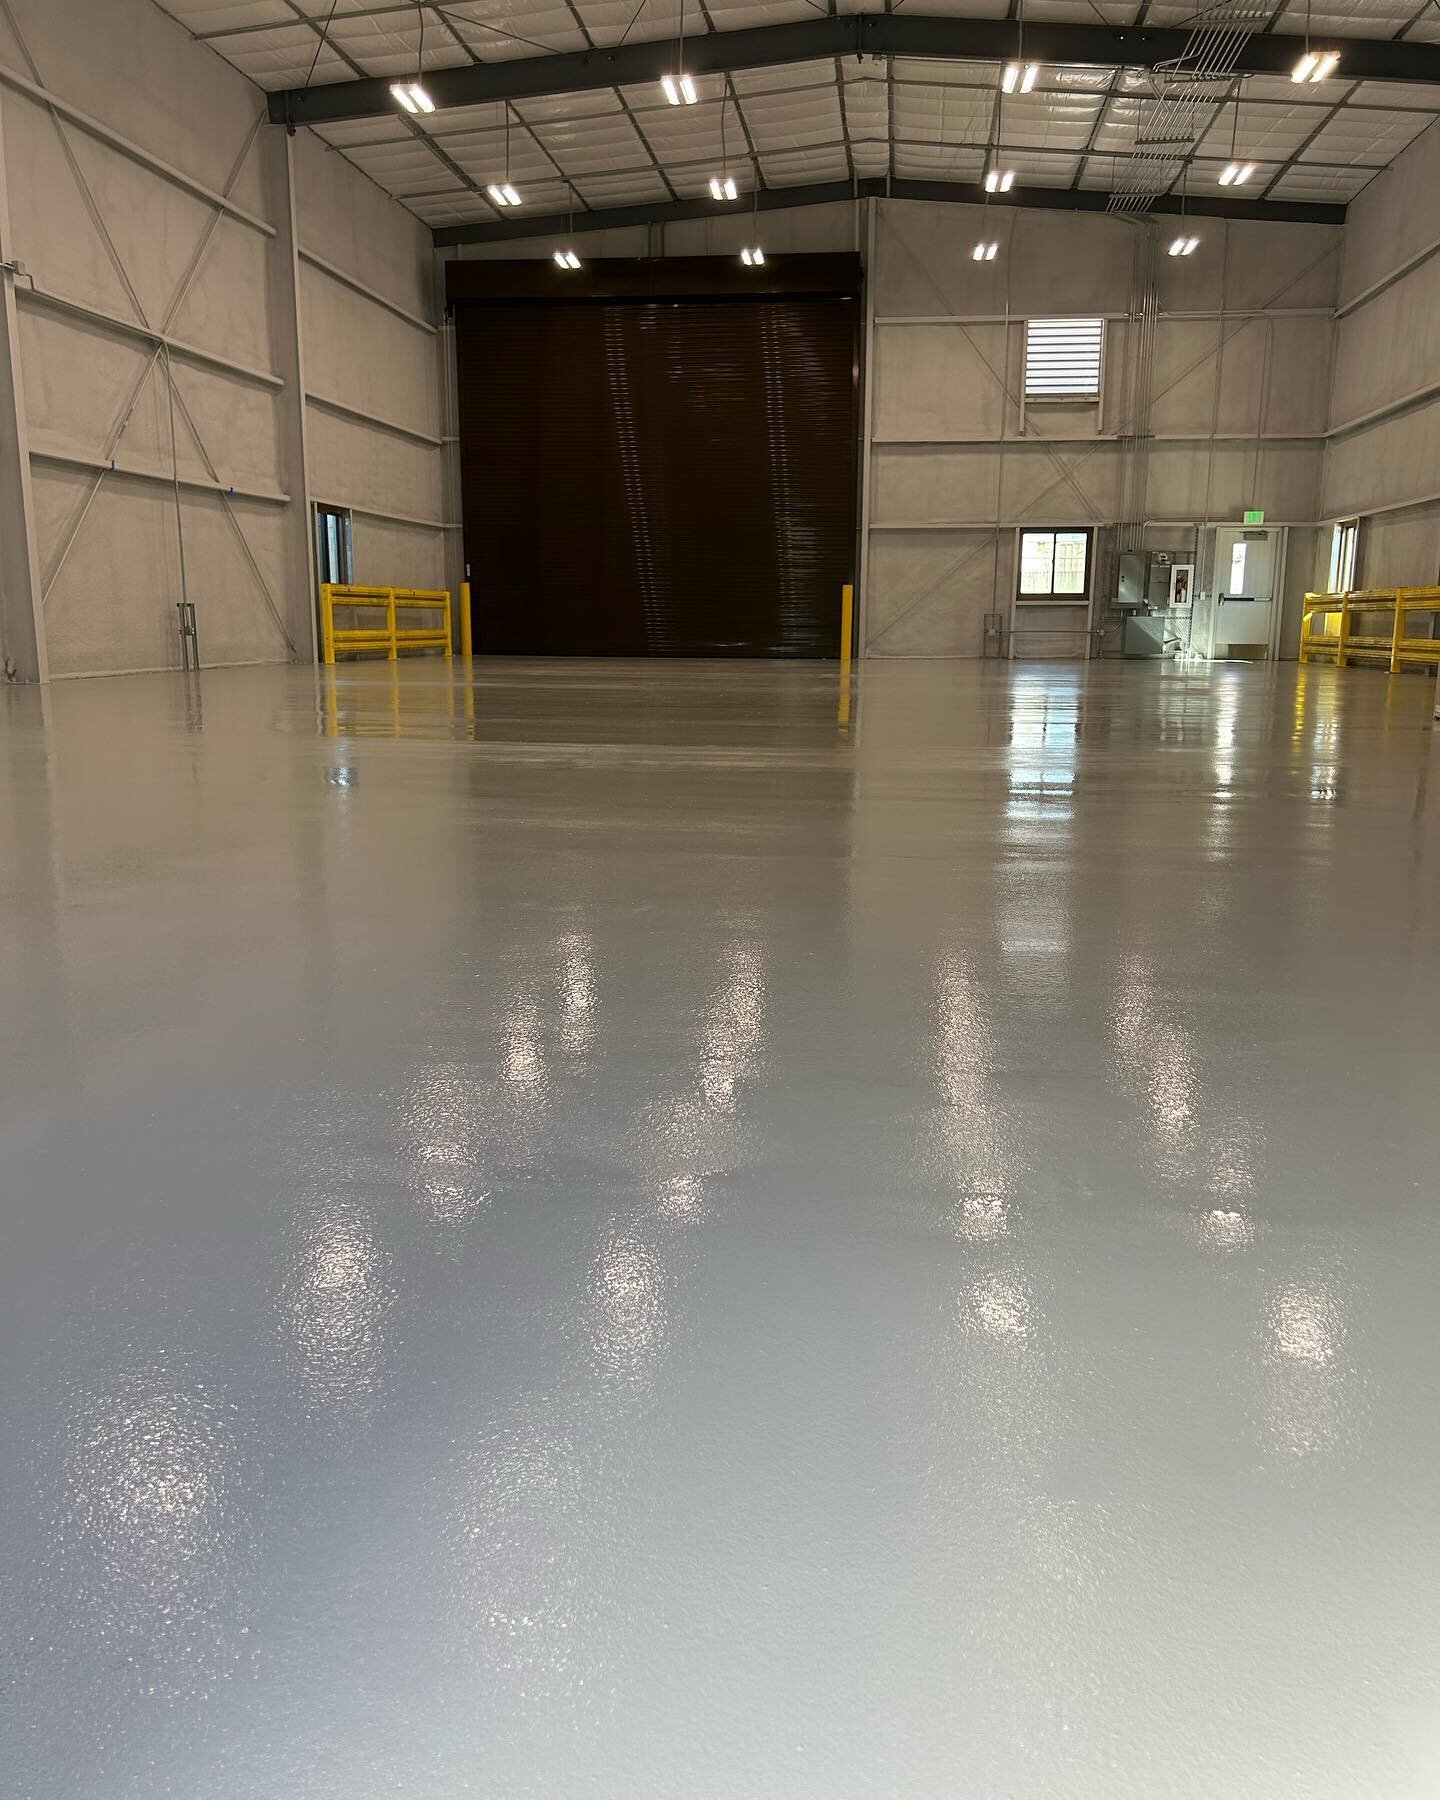 This week it was a hangar and handbag retailer, but solid color epoxies have a wide range of applications. New garage floor maybe? Color chart attached.